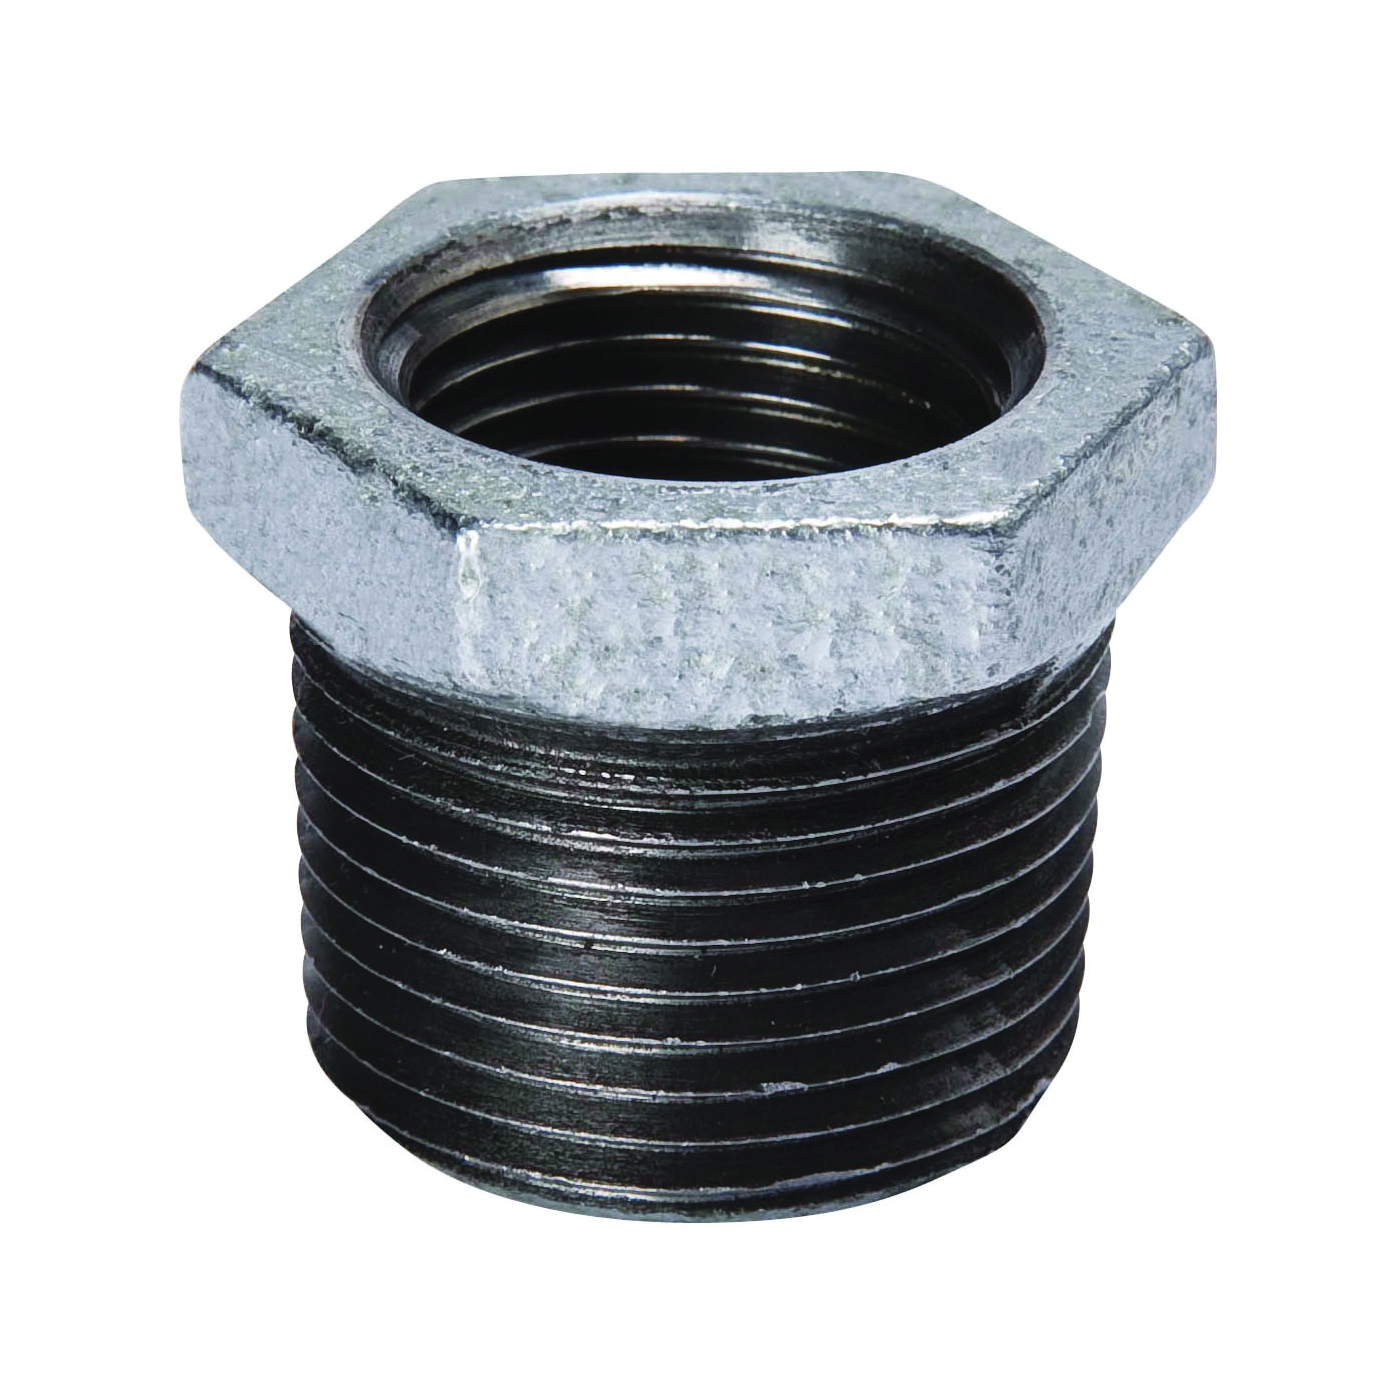 511-917BC Reducing Pipe Bushing, 4 x 1-1/2 in, Male x Female